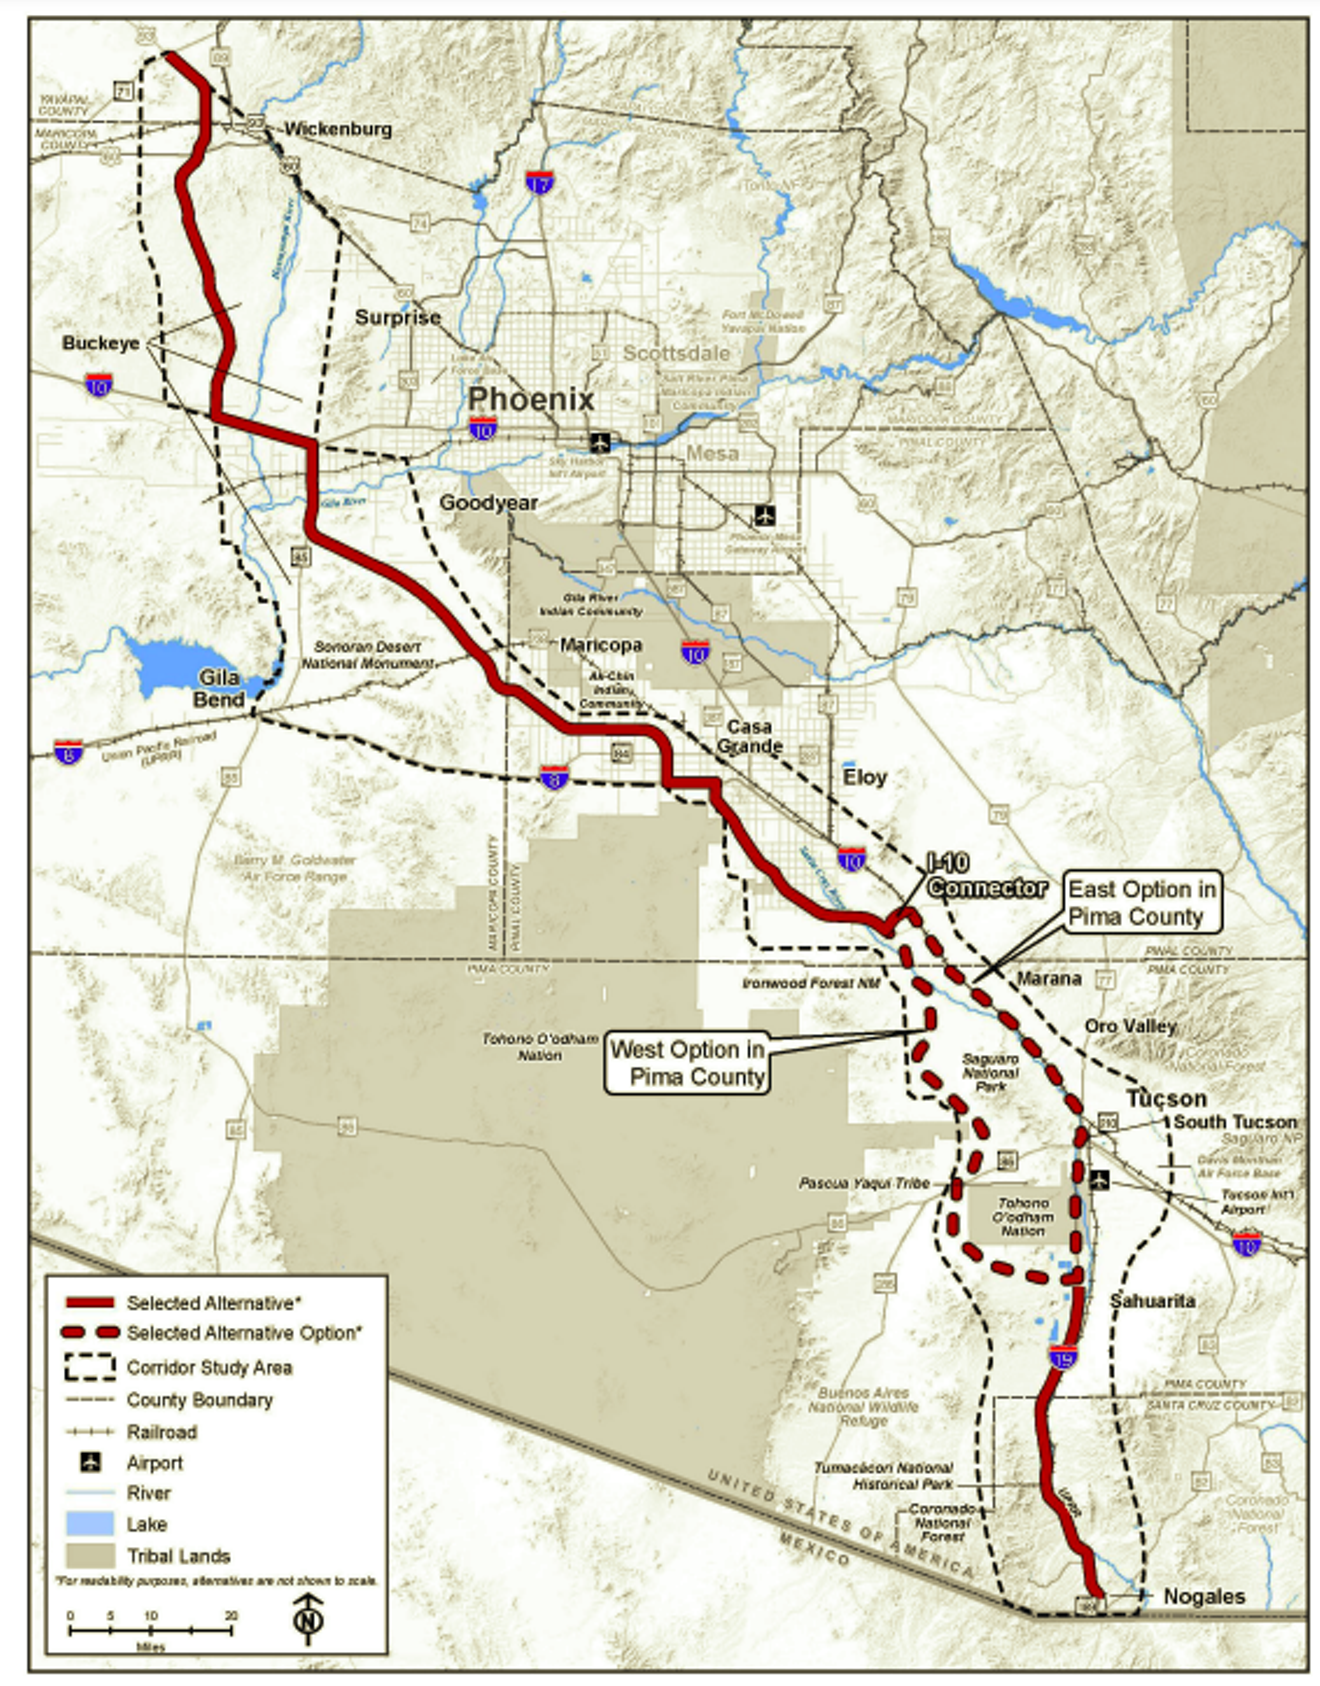 Here's the proposed route of Interstate 11